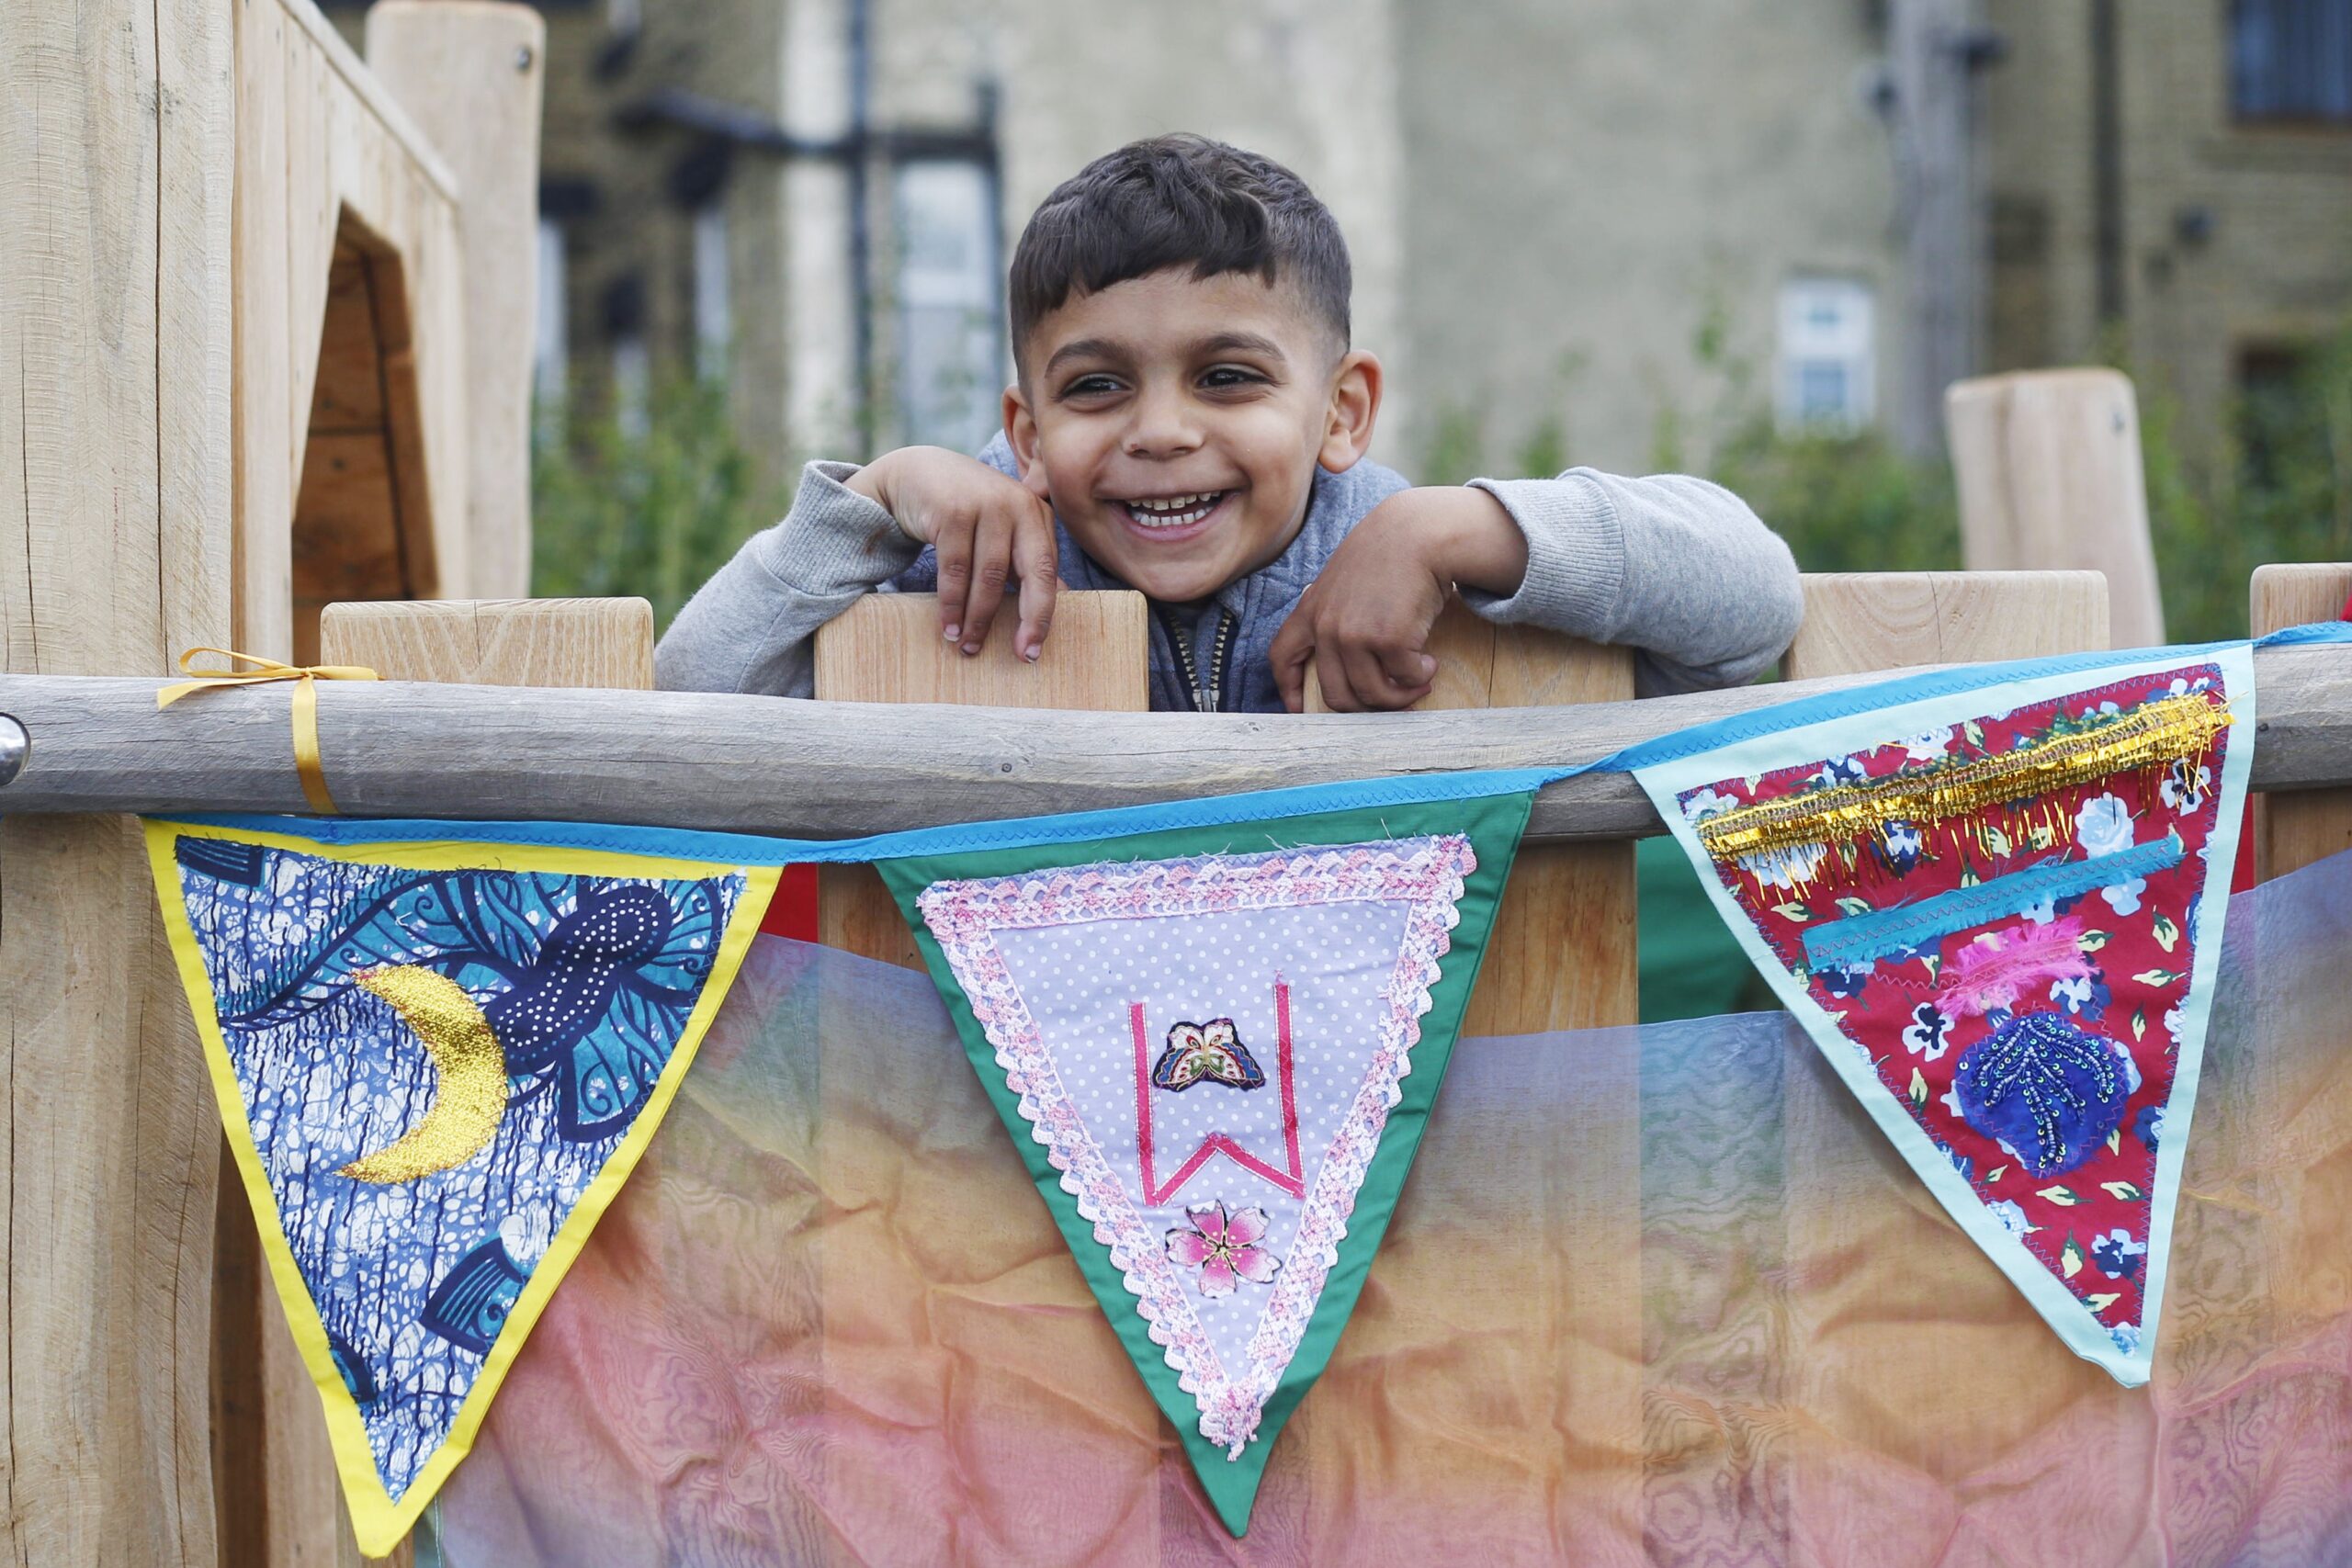 Ten outdoor play spaces at Bradford nursery schools transformed thanks to Better Place